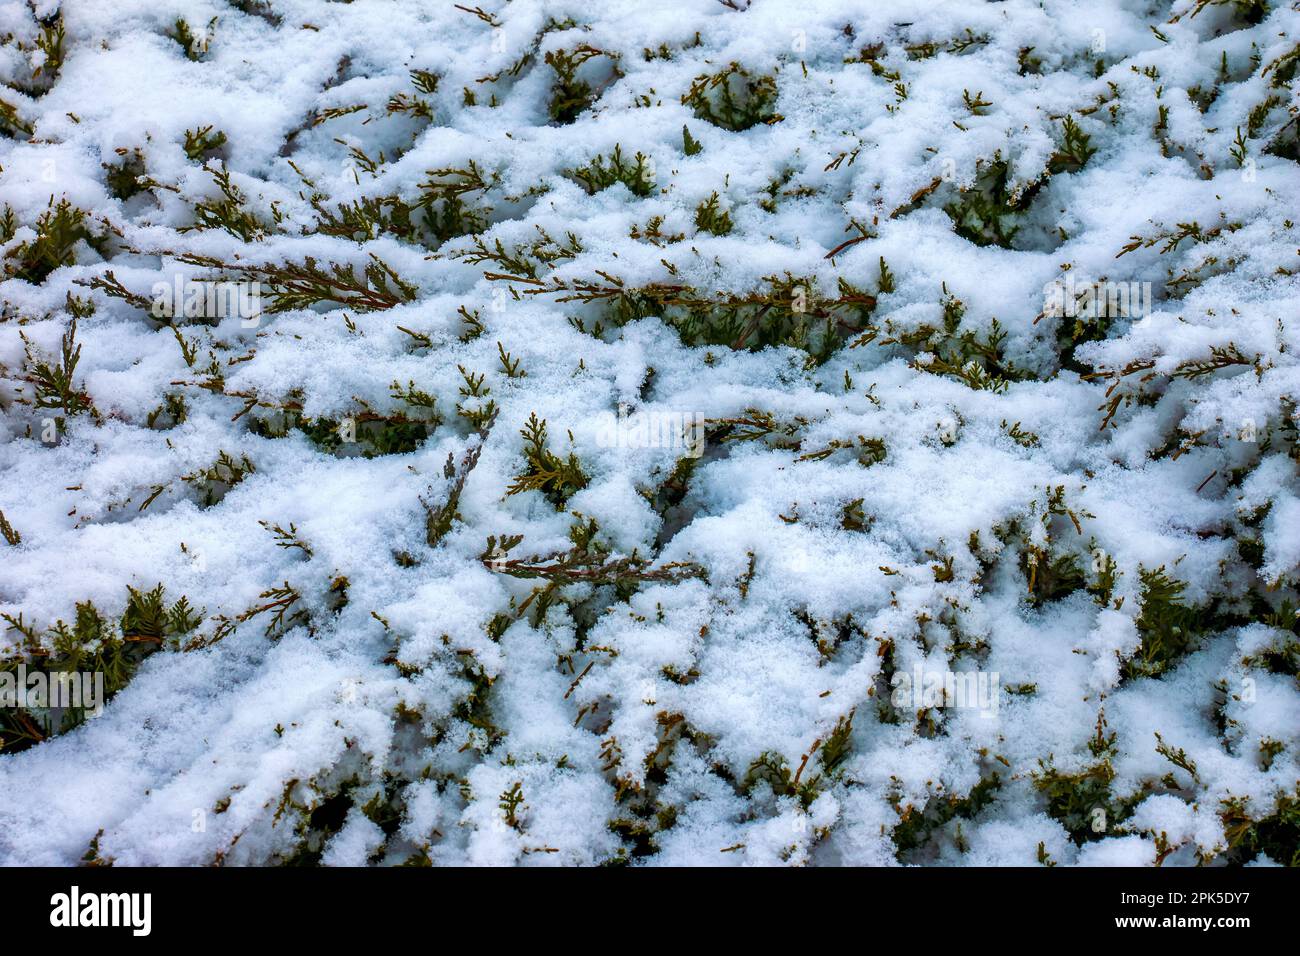 Abstract texture background of Juniperus horizontalis Moench plants covered in deep snow in winter, with copy space Stock Photo